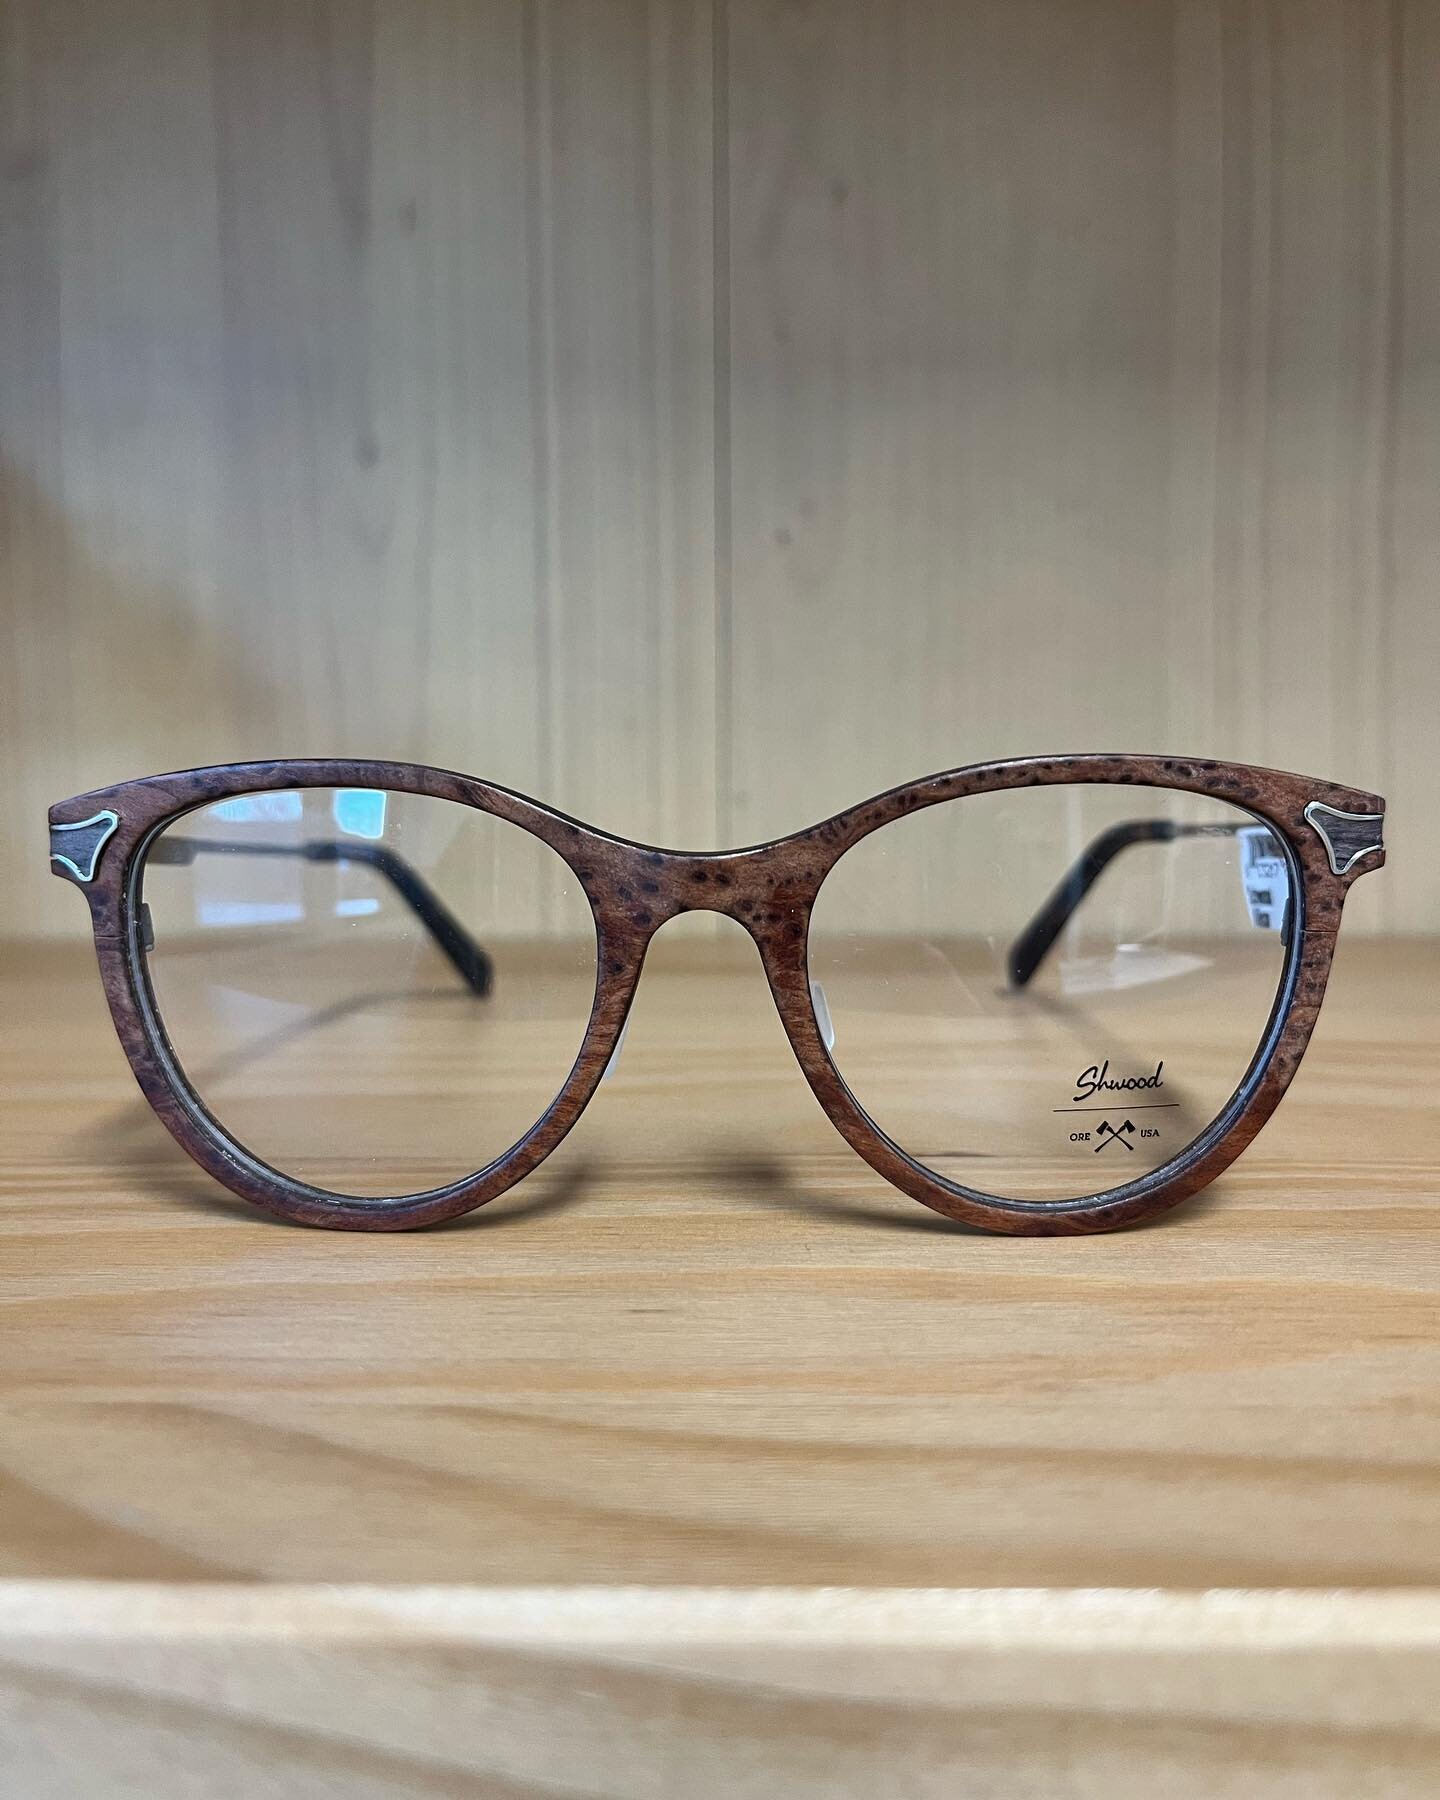 We have the most update technology to care for your eyes but we also have pretty awesome frames too!

We love these from Schwood Eyewear, USA based in the Pacific Northwest, these all have real wood accents in the frame!